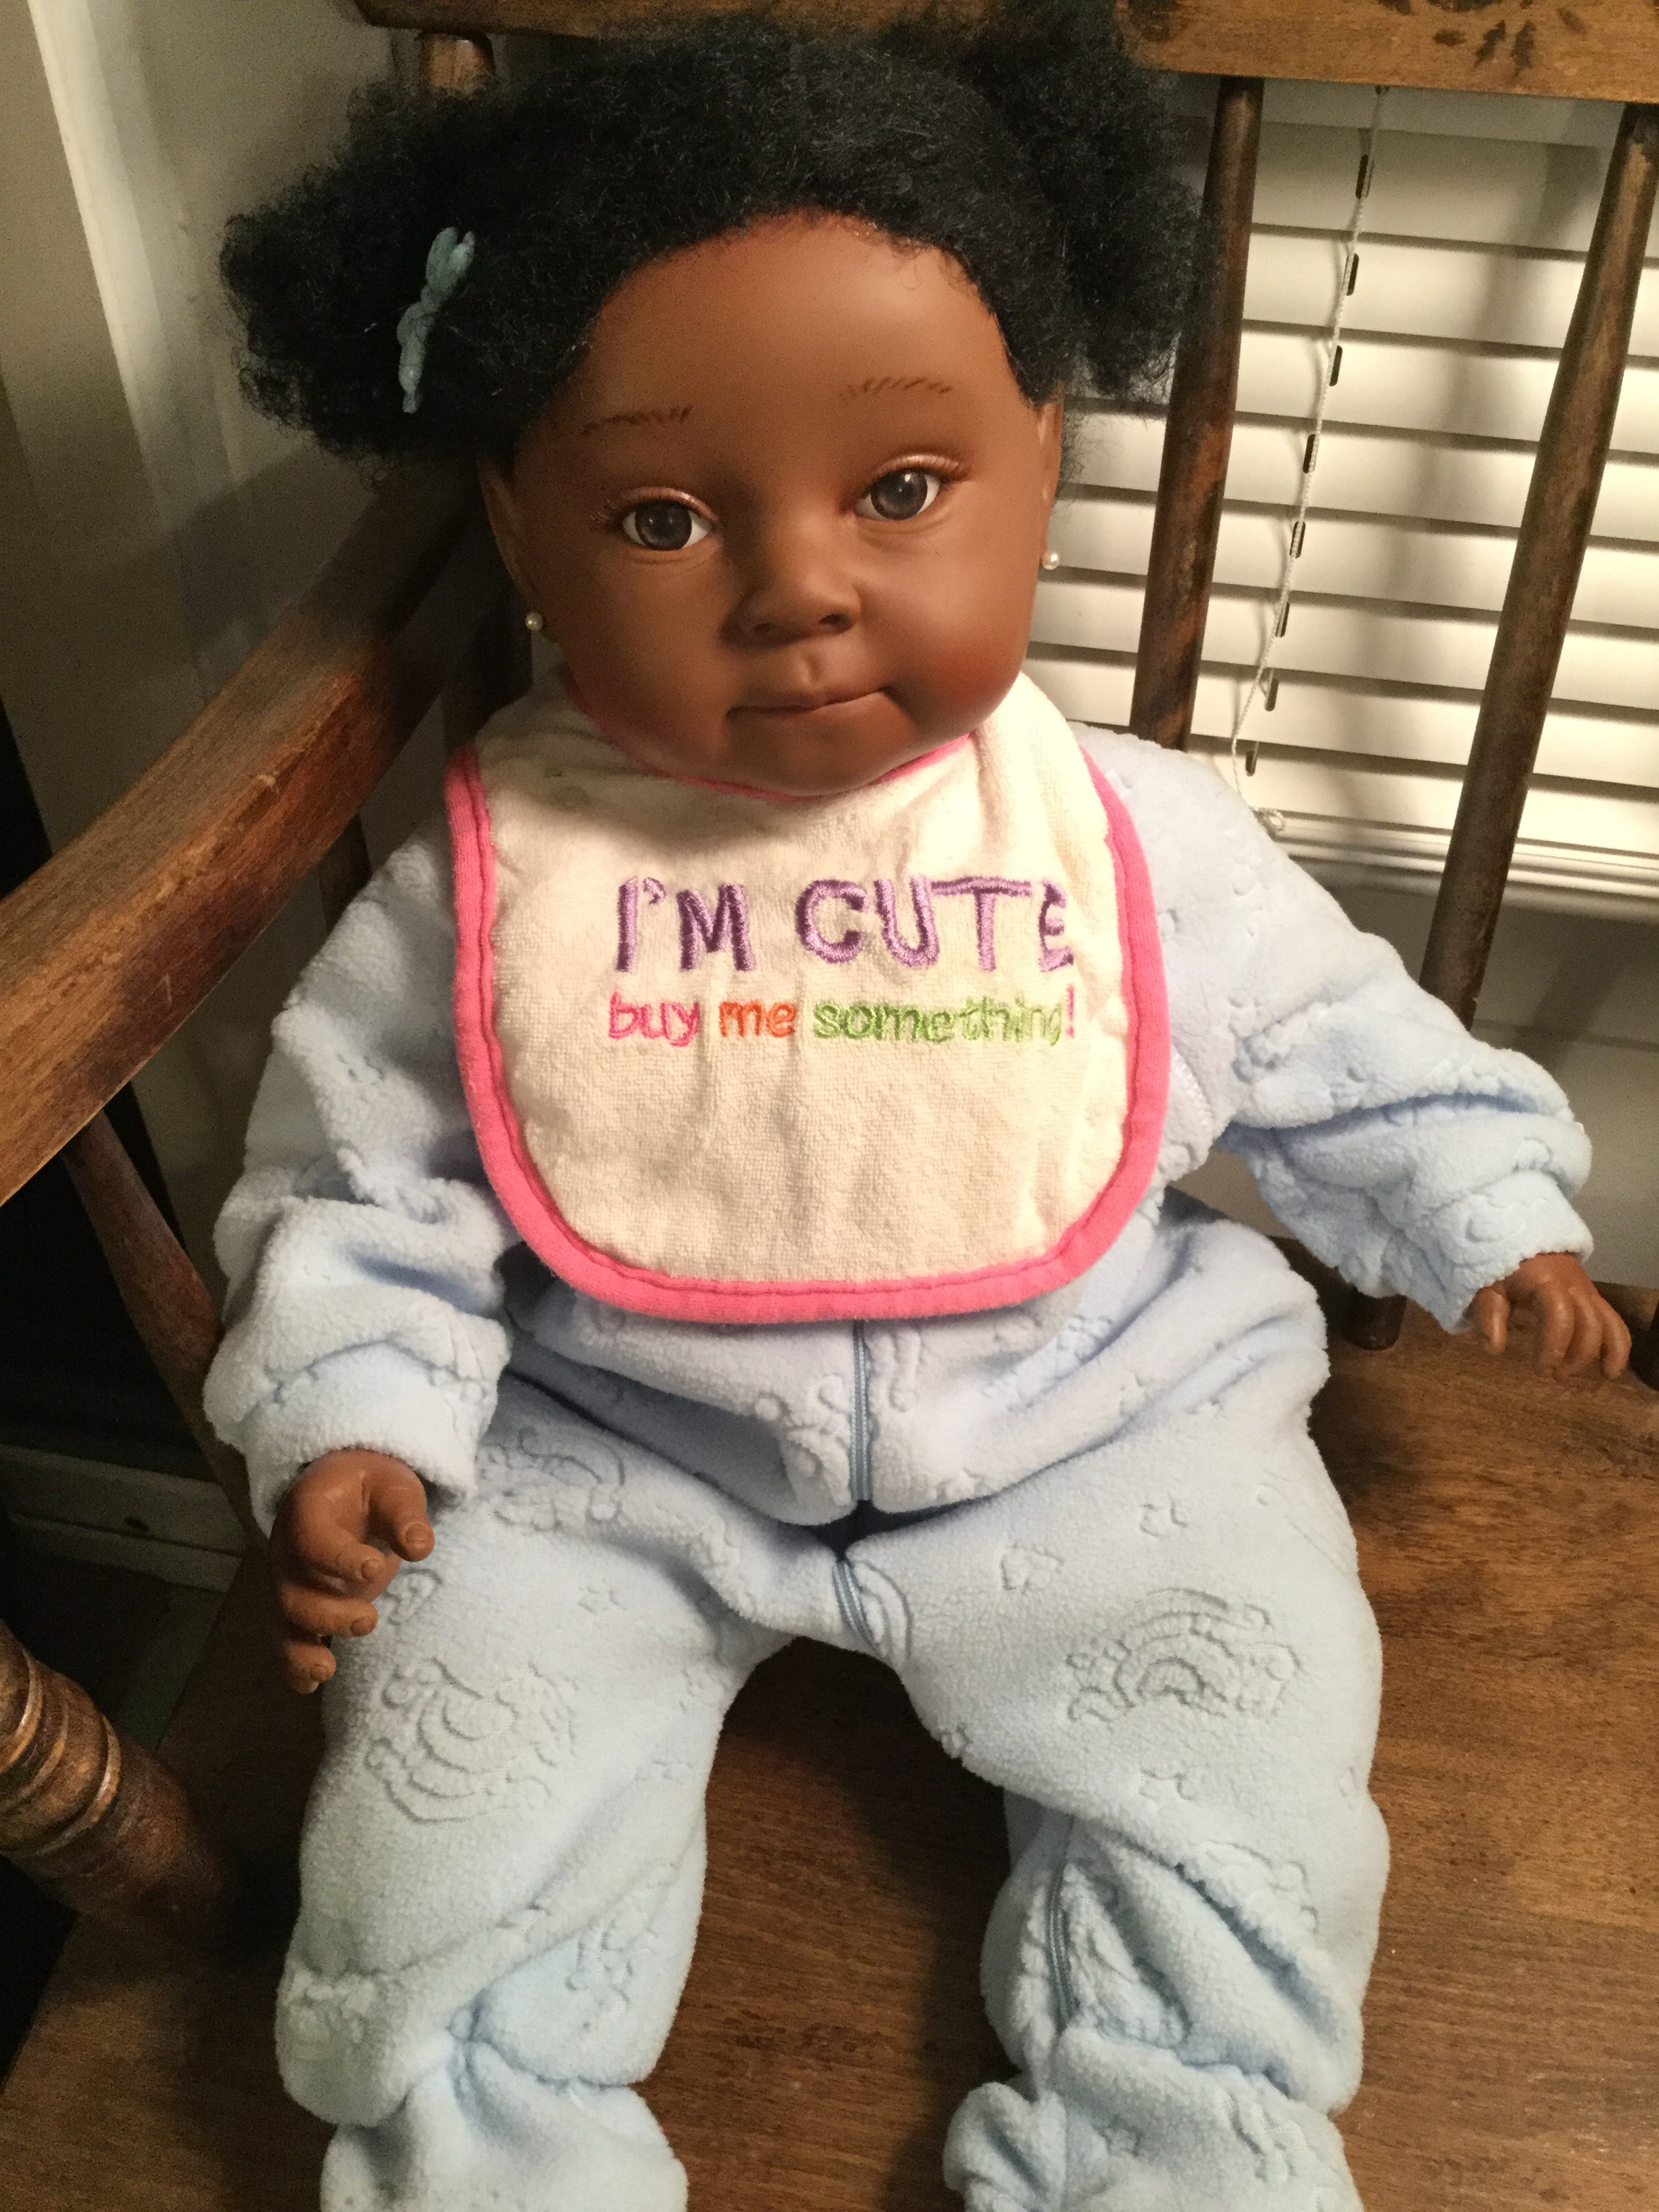 Black baby dolls that look real for sale